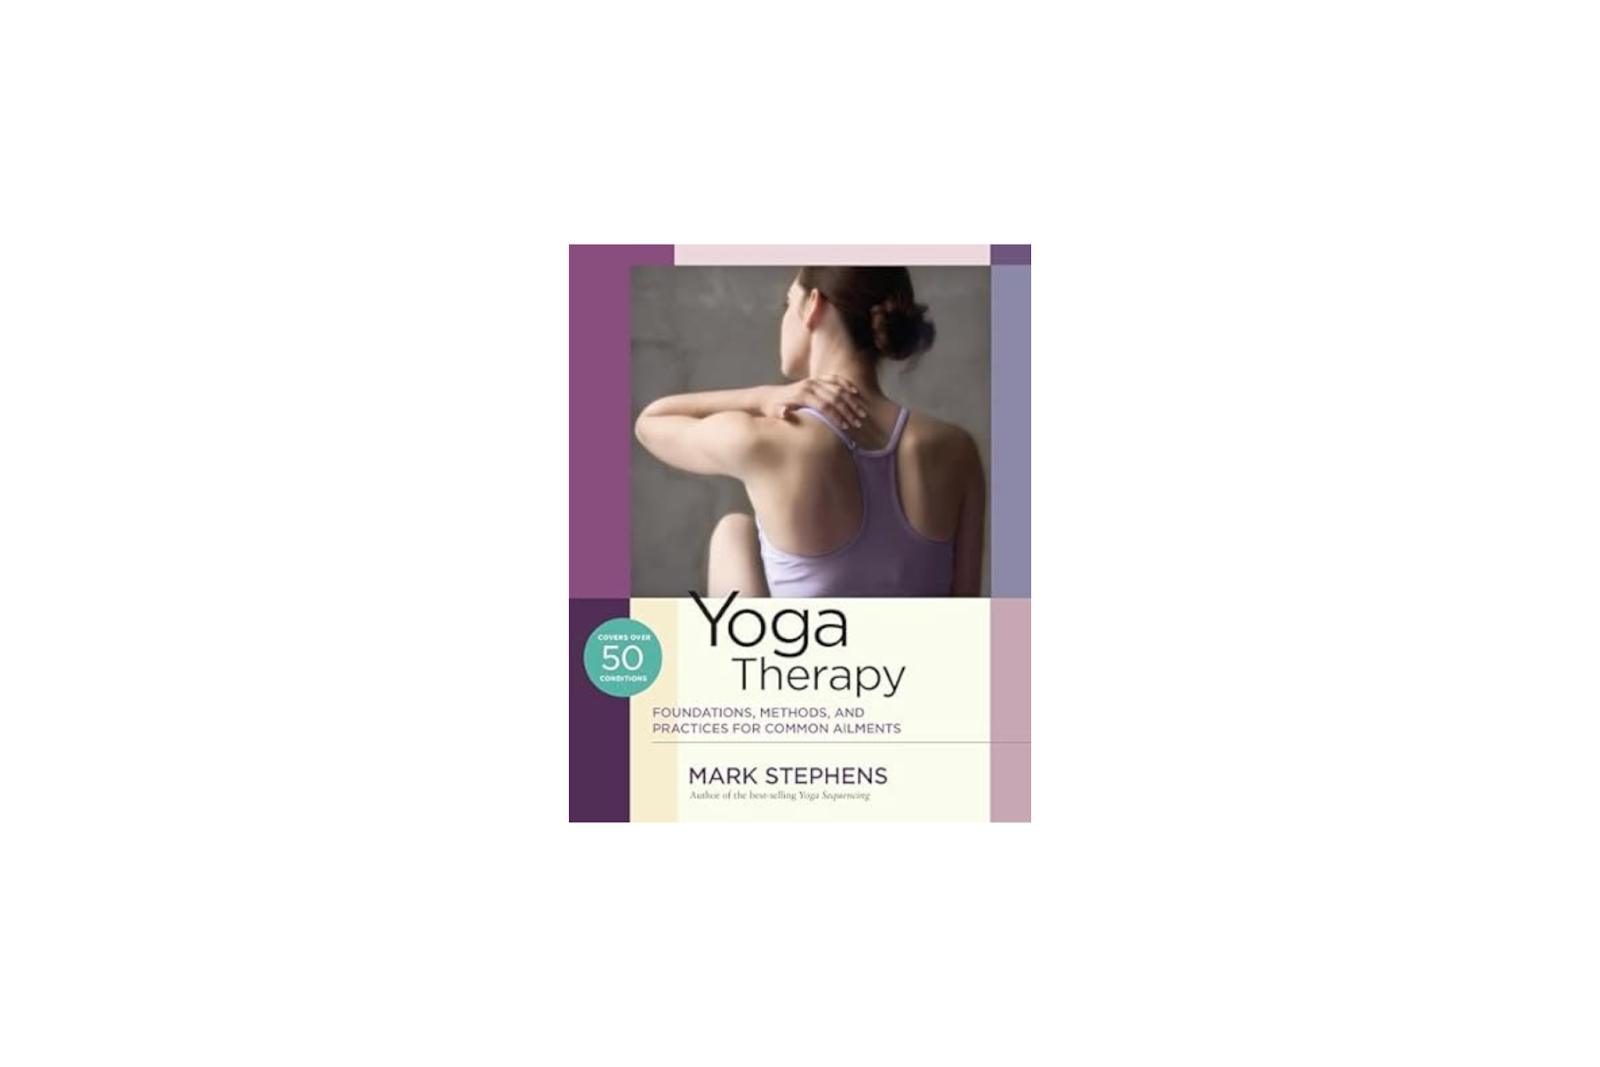 Yoga Therapy by Mark Stephens